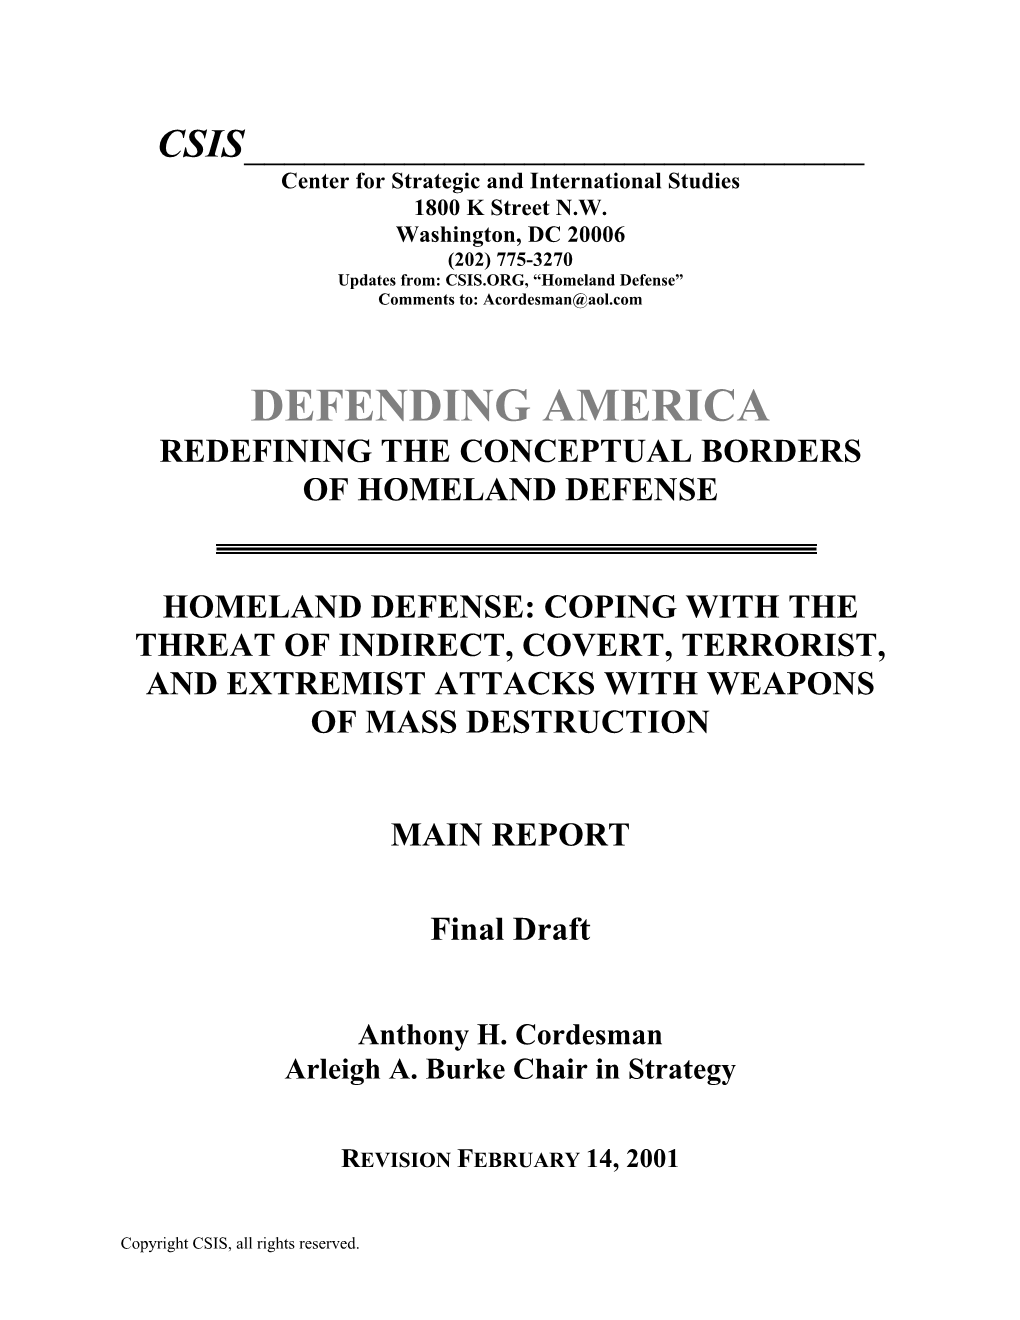 Homeland Defense: Coping with the Threat of Indirect, Covert, Terrorist, and Extremist Attacks with Weapons of Mass Destruction